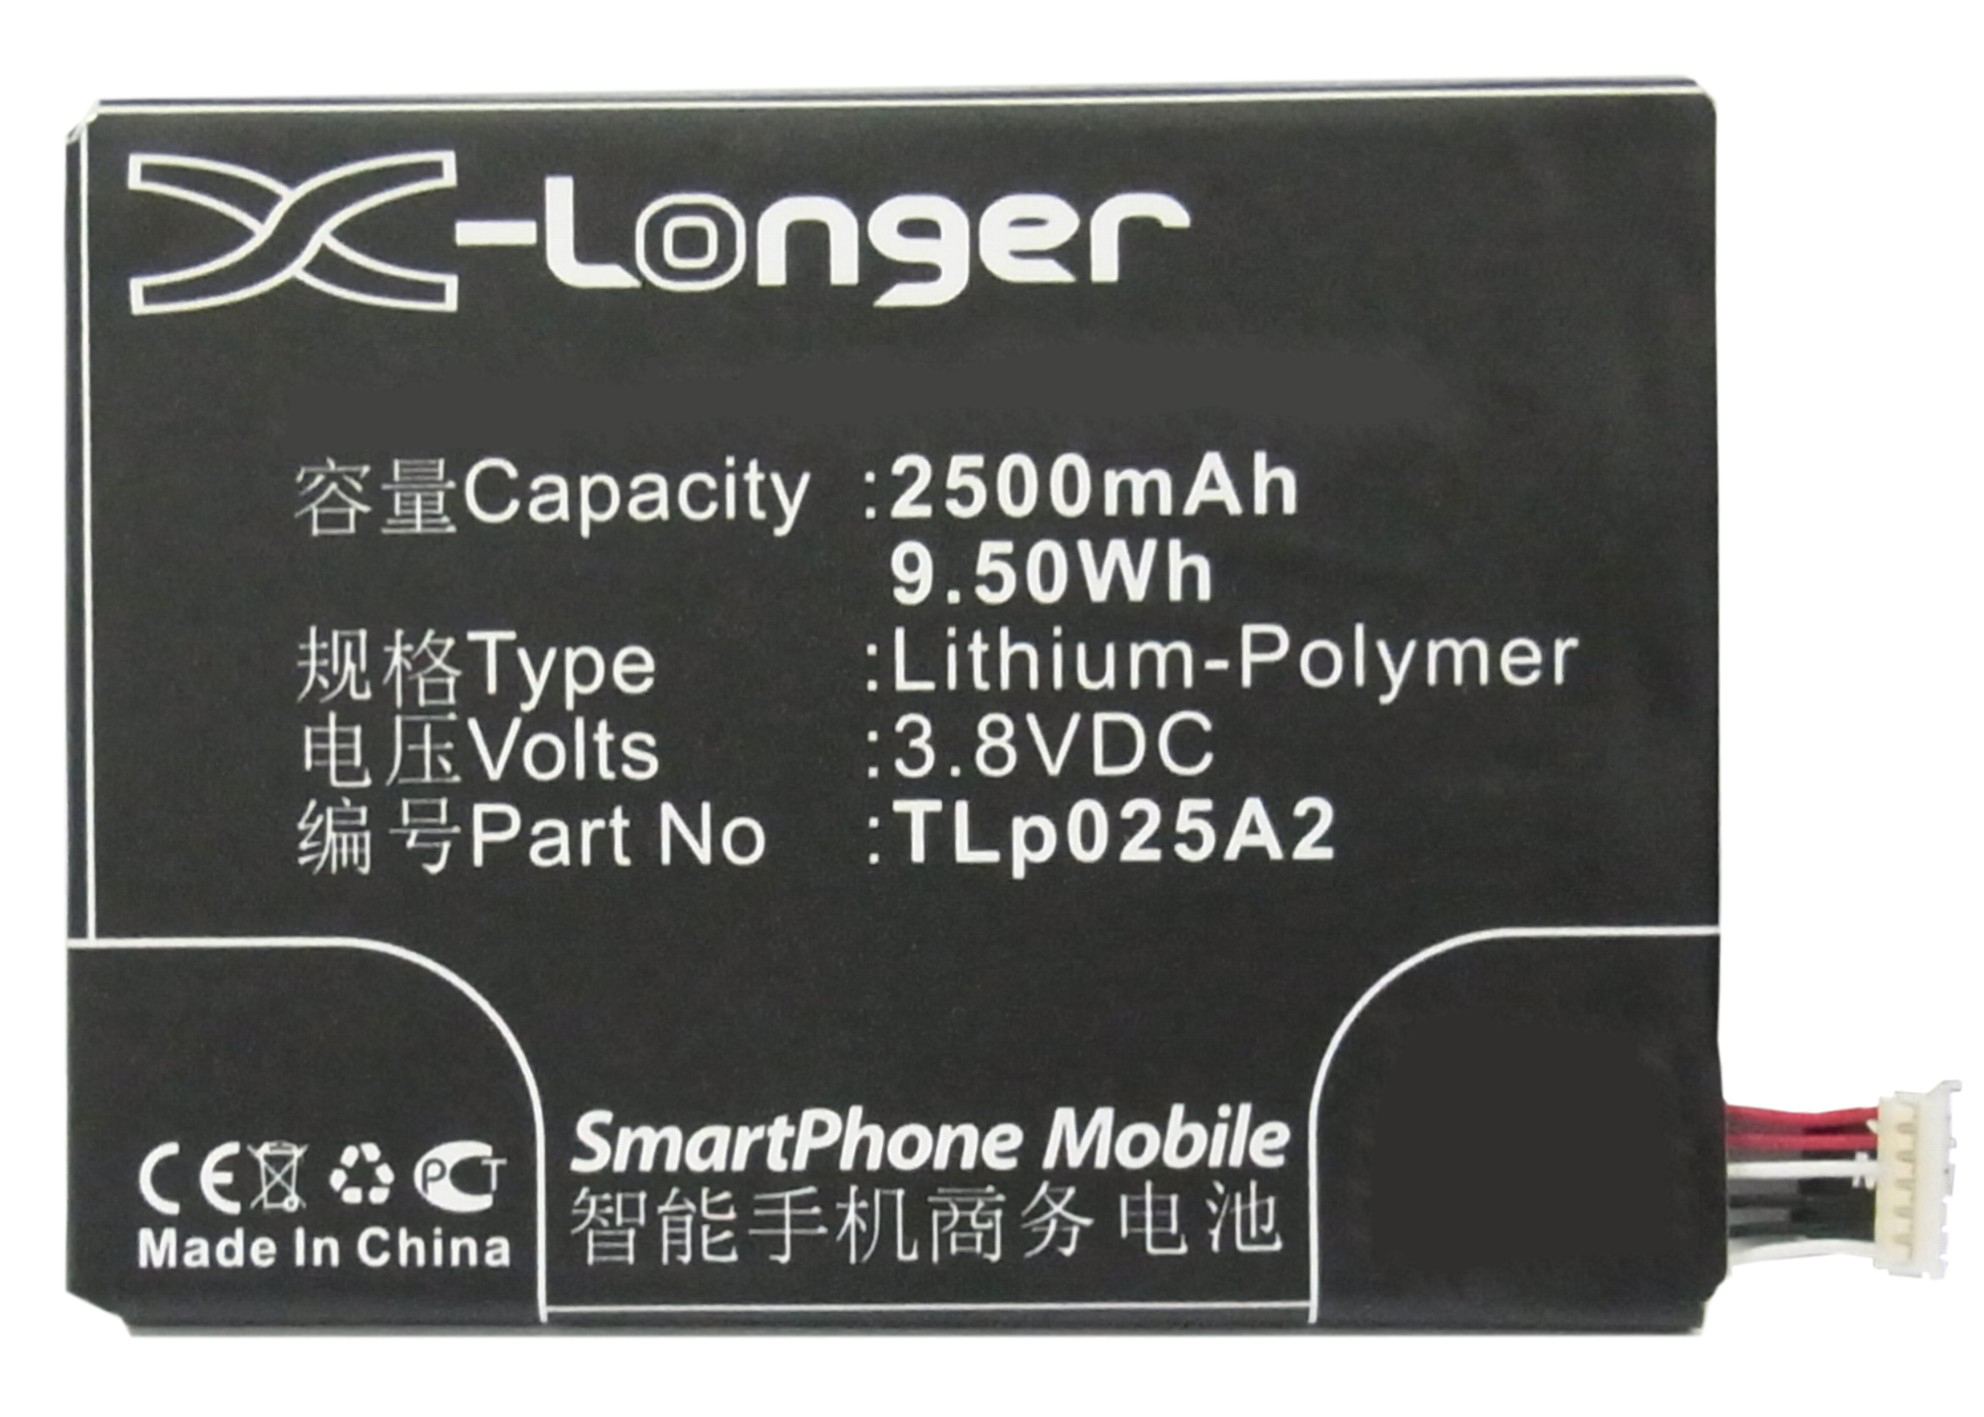 Synergy Digital Battery Compatible With Alcatel CAC2500013C2 Cellphone Battery - (Li-Pol, 3.8V, 2500 mAh / 9.50Wh)